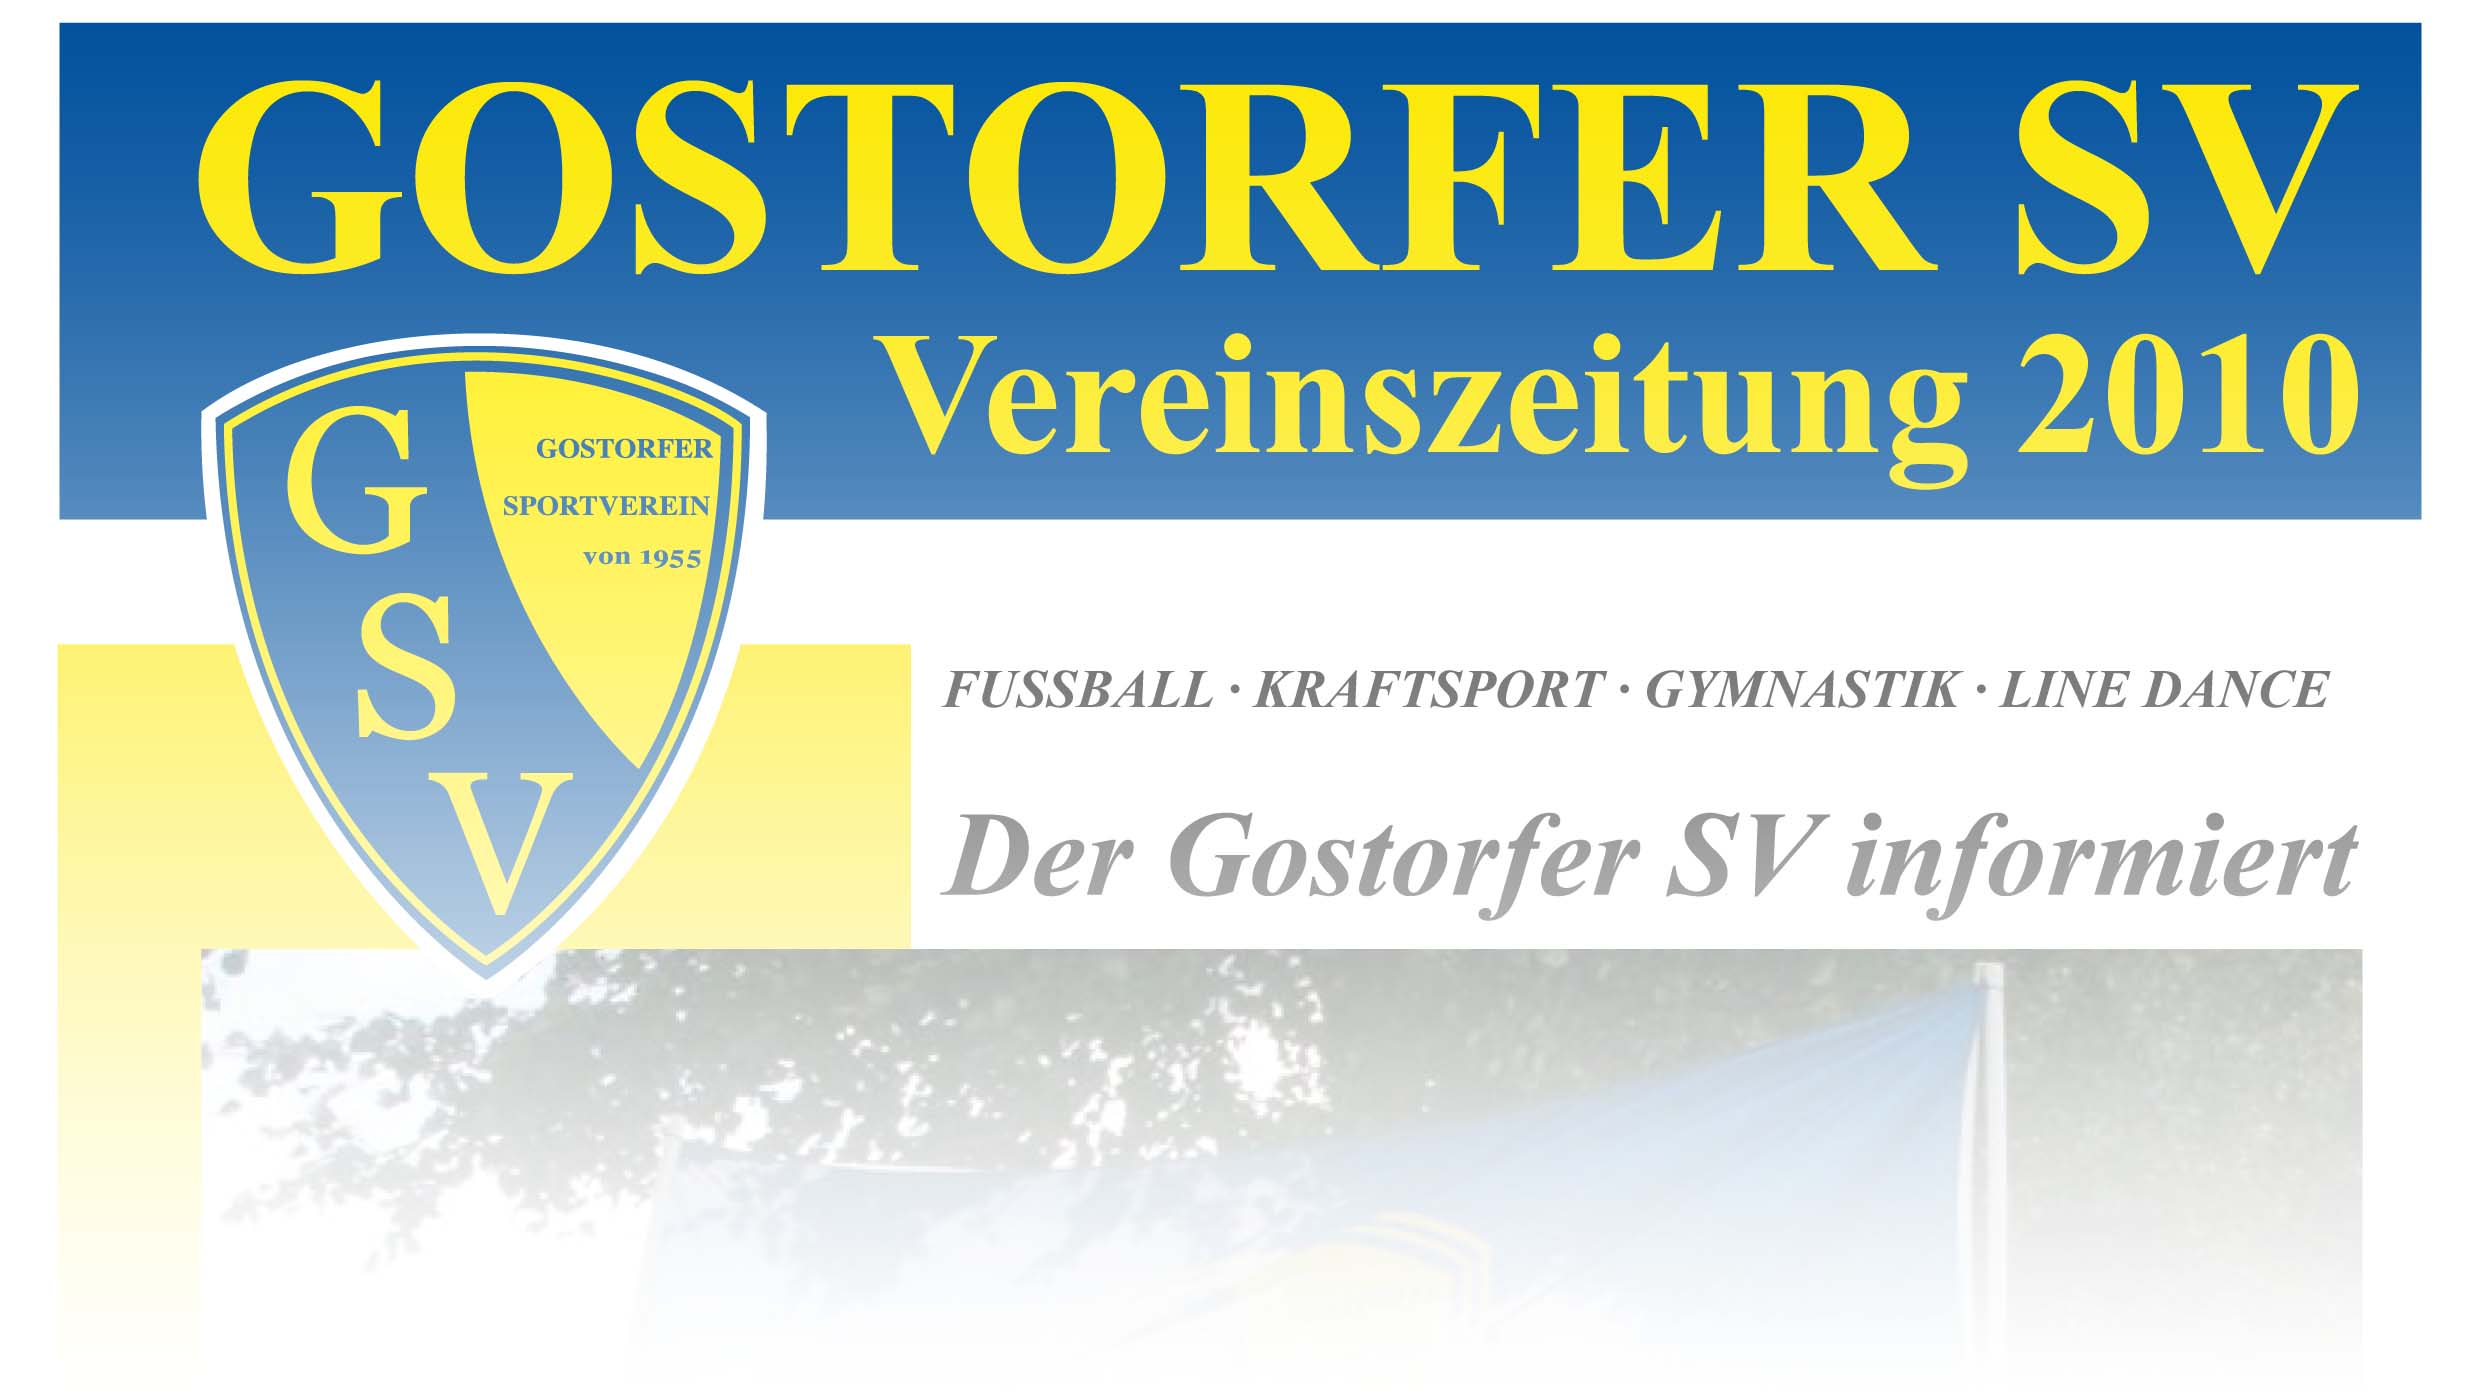 You are currently viewing Vereinszeitung 2010